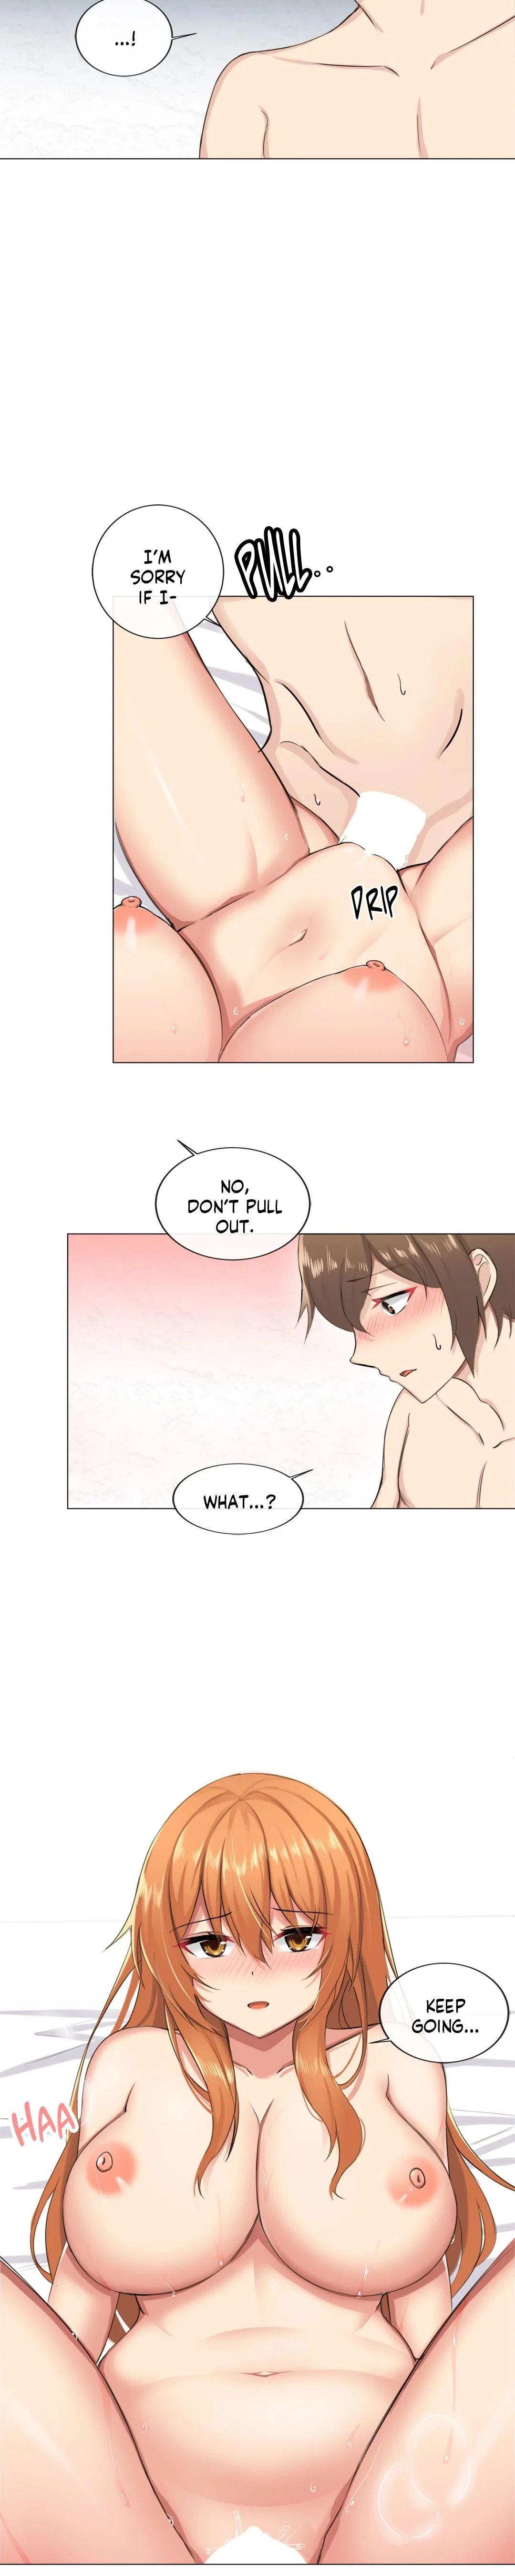 [Dumangoon, 130F] Sexcape Room: Pile Up Ch.9/9 [English] [Manhwa PDF] Completed 160